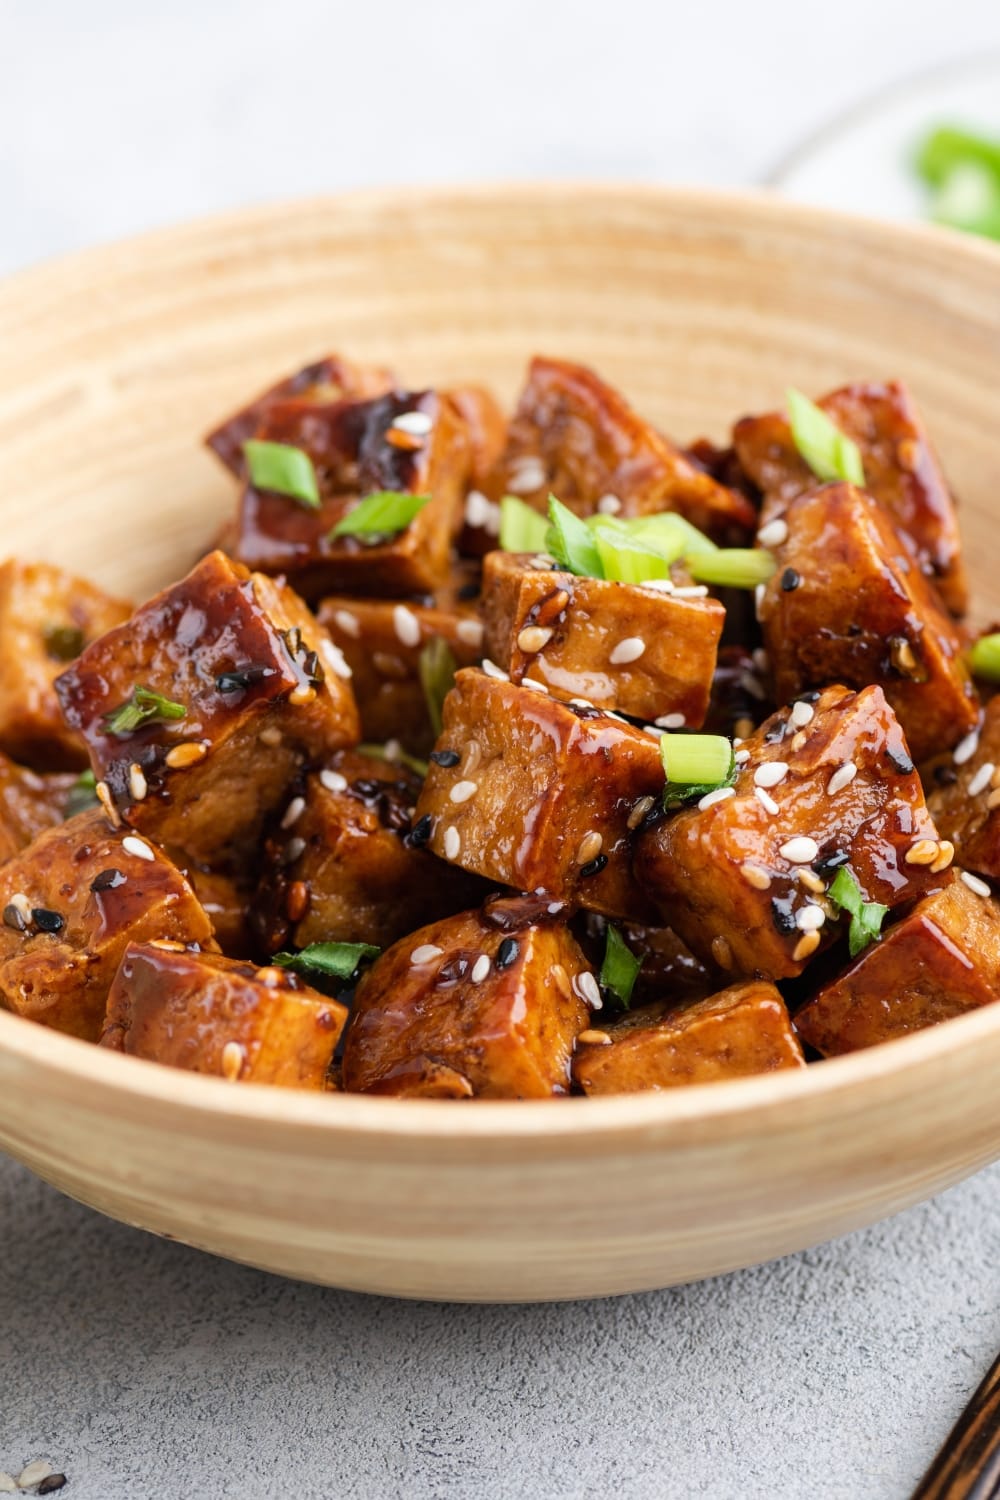 Tofu Cubes with Teriyaki Dipping Sauce and Sesame Seeds, Served on a Brown Bowl